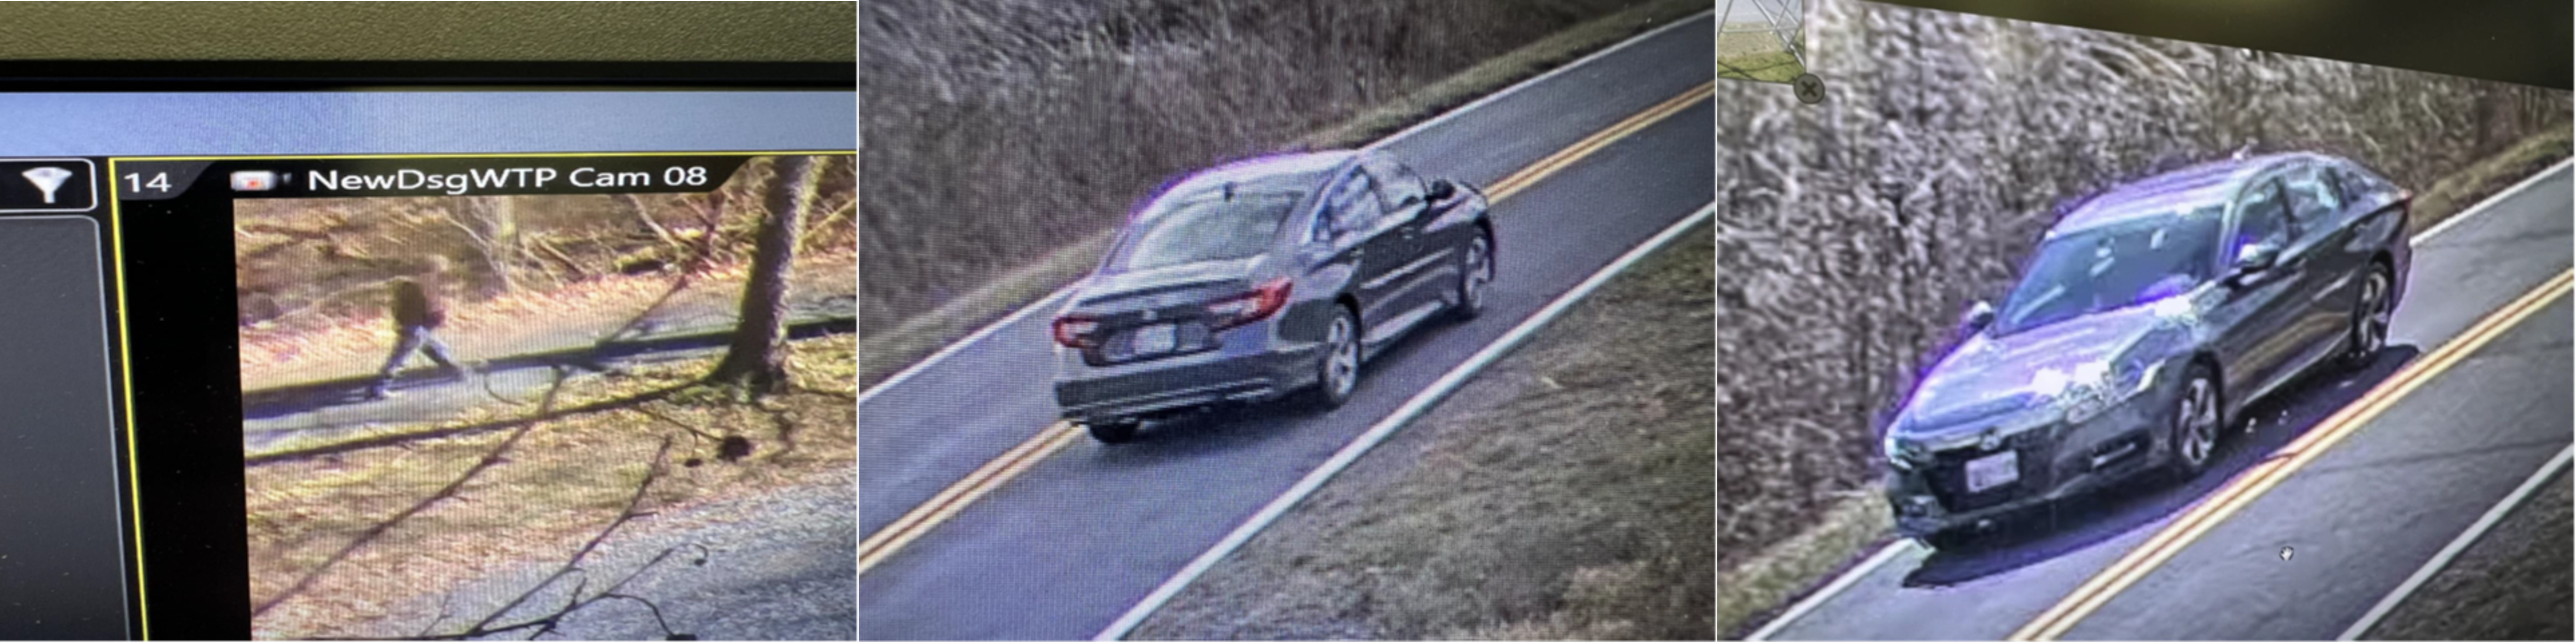 Multiple images of the possible suspect and gray 4-door sedan